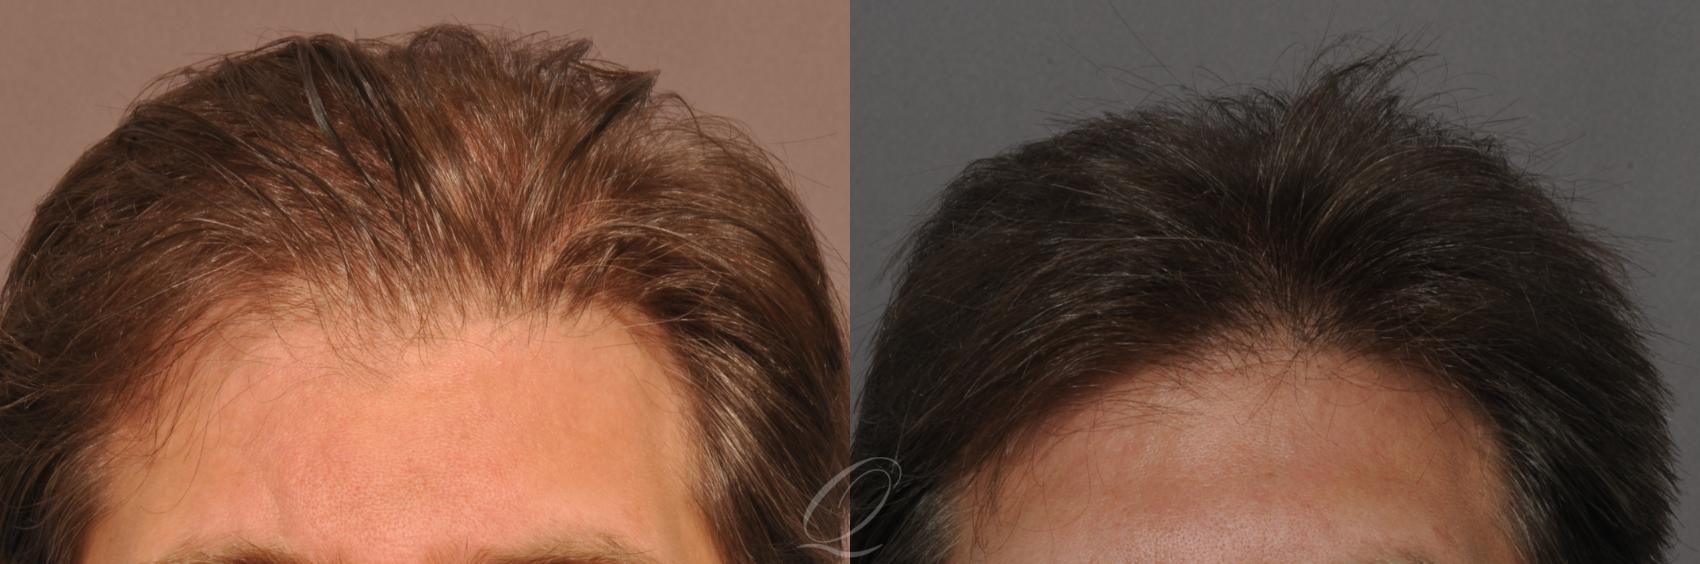 FUT Case 1030 Before & After View #1 | Rochester, Buffalo, & Syracuse, NY | Quatela Center for Hair Restoration